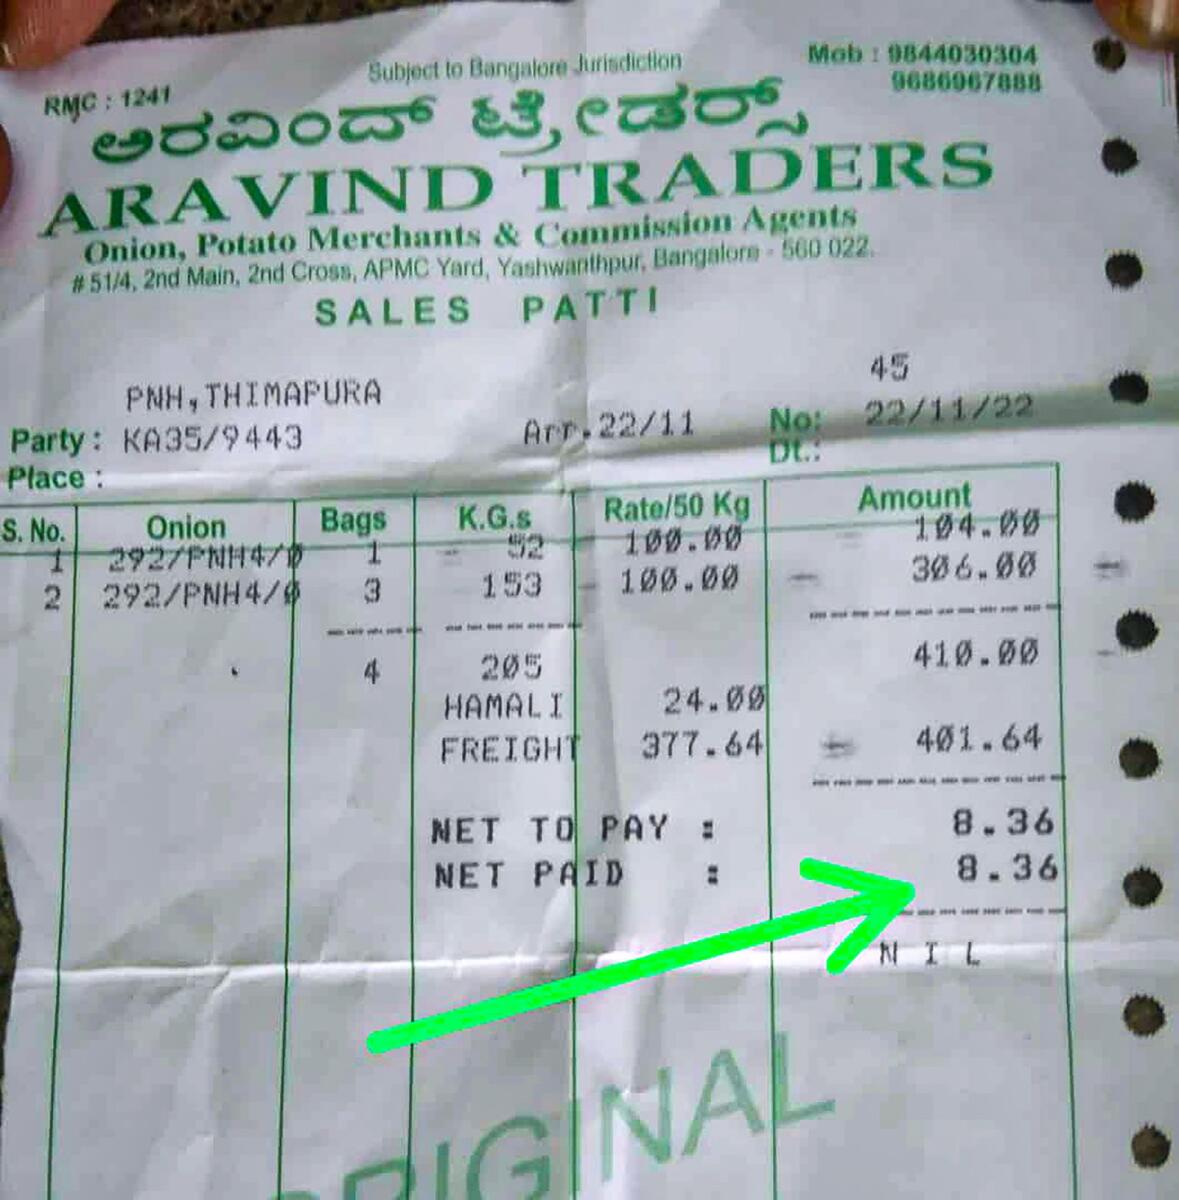 A receipt shows how a farmer from Gadag got just Rs8.36 after selling 205kg of onion in Bengaluru's Yeshwanthpur market. The receipt went viral on social media. — PTI